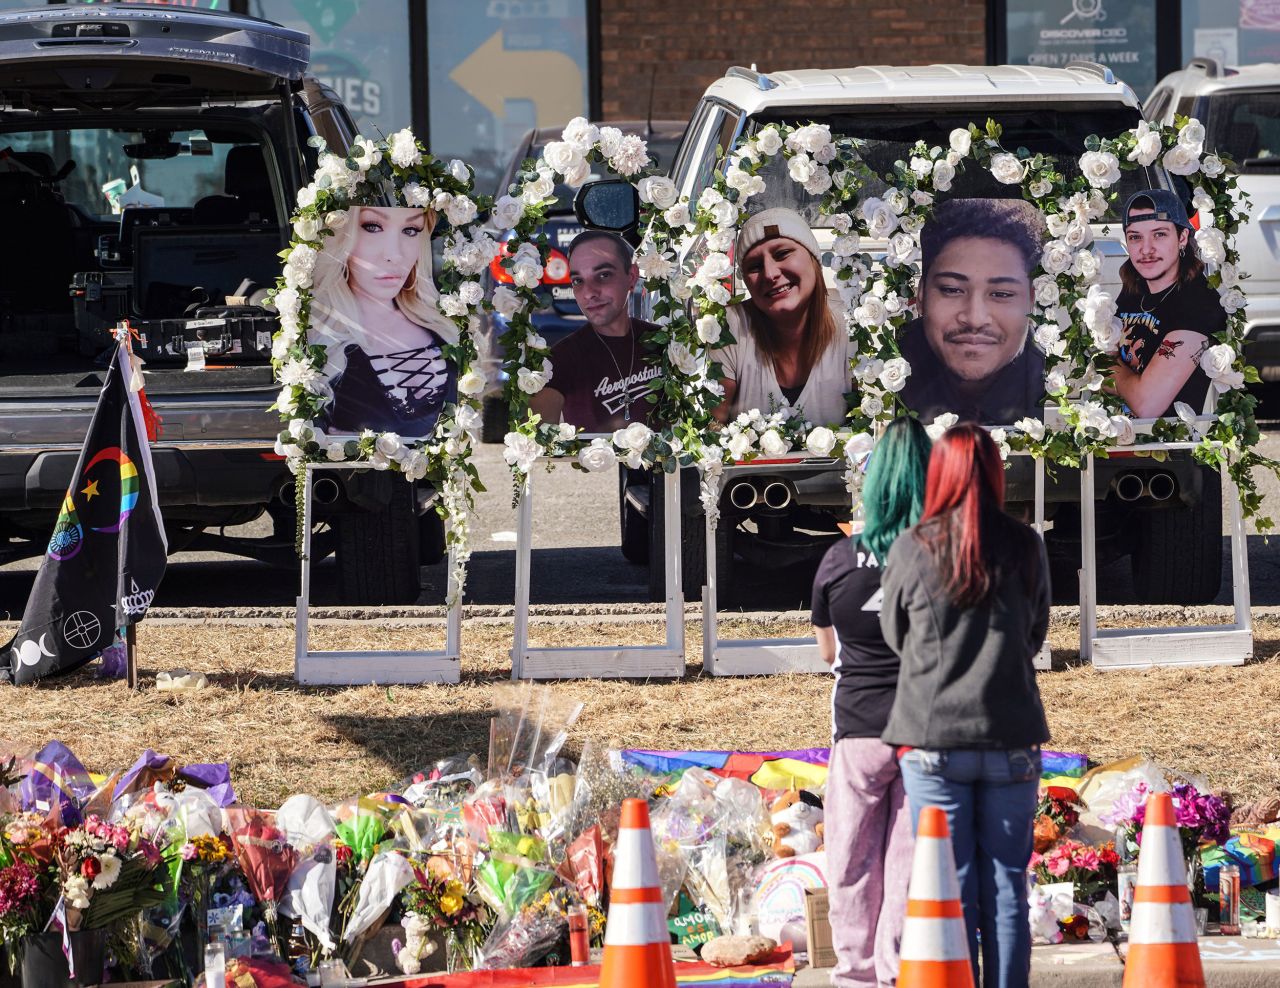 People pay their respects at a memorial display set up to remember the five victims of the Club Q shooting in Colorado Springs, Colorado, on Tuesday, November 22.